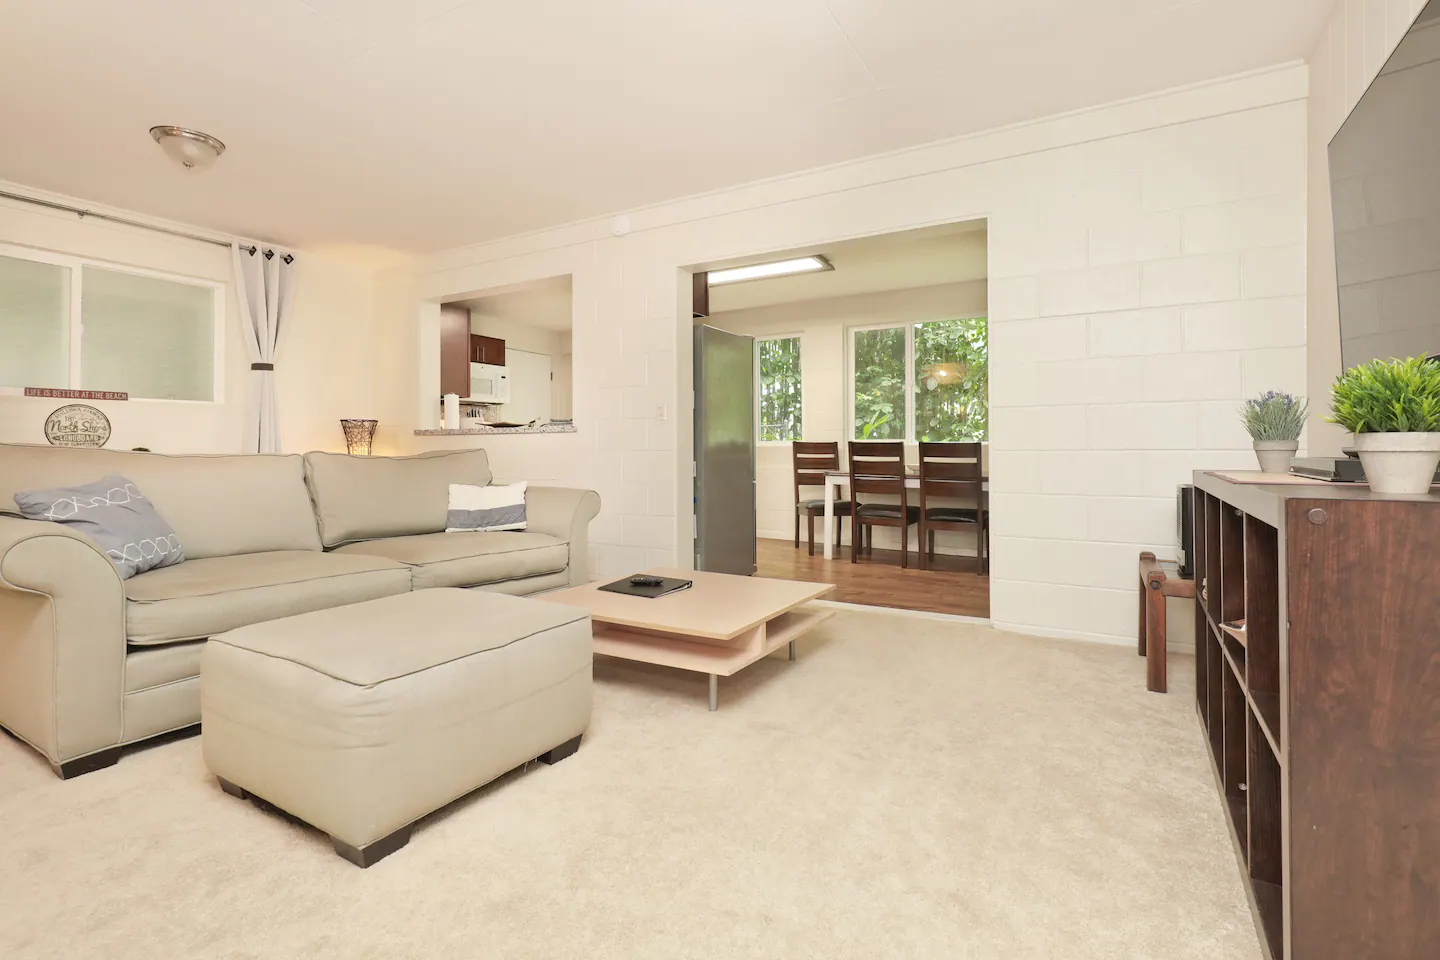 Palolo Valley Luxury Apartment, one of the best Airbnbs in Oahu